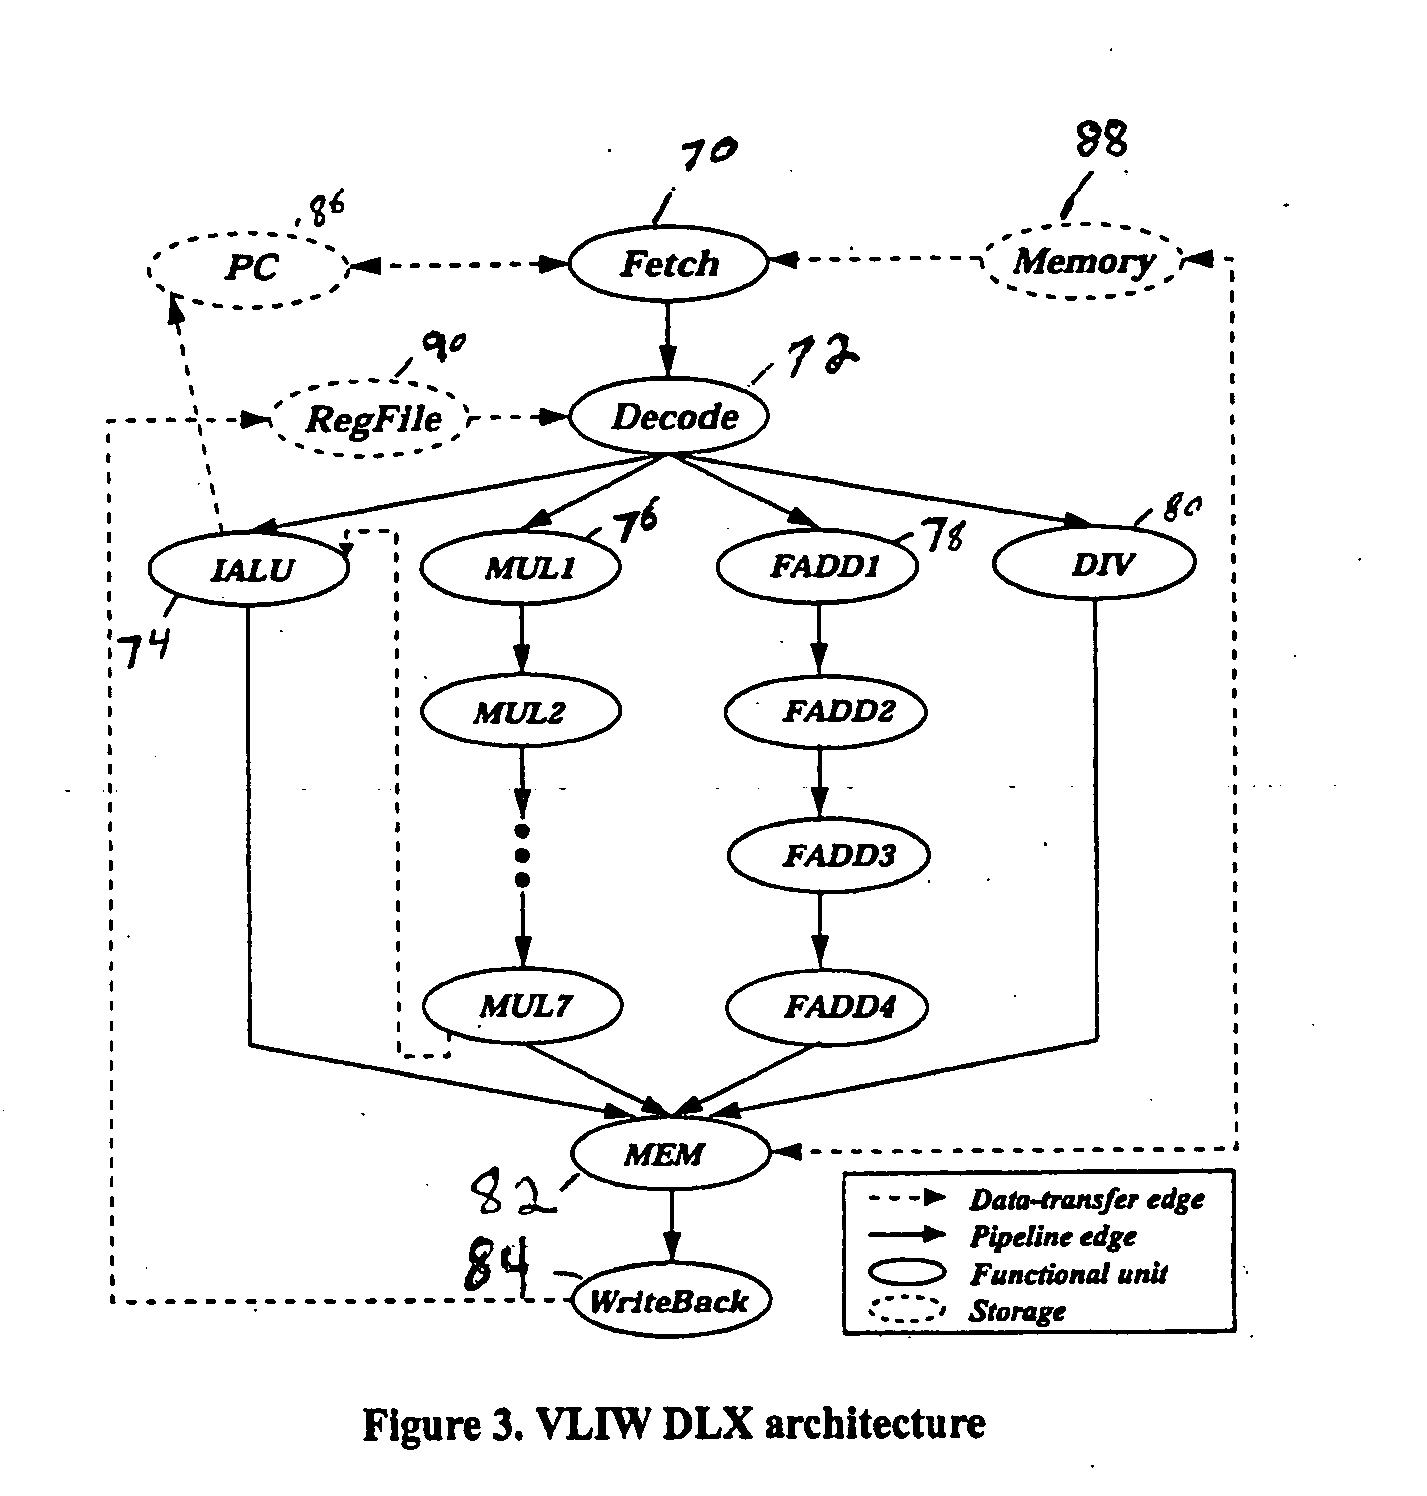 Functional coverage driven test generation for validation of pipelined processors